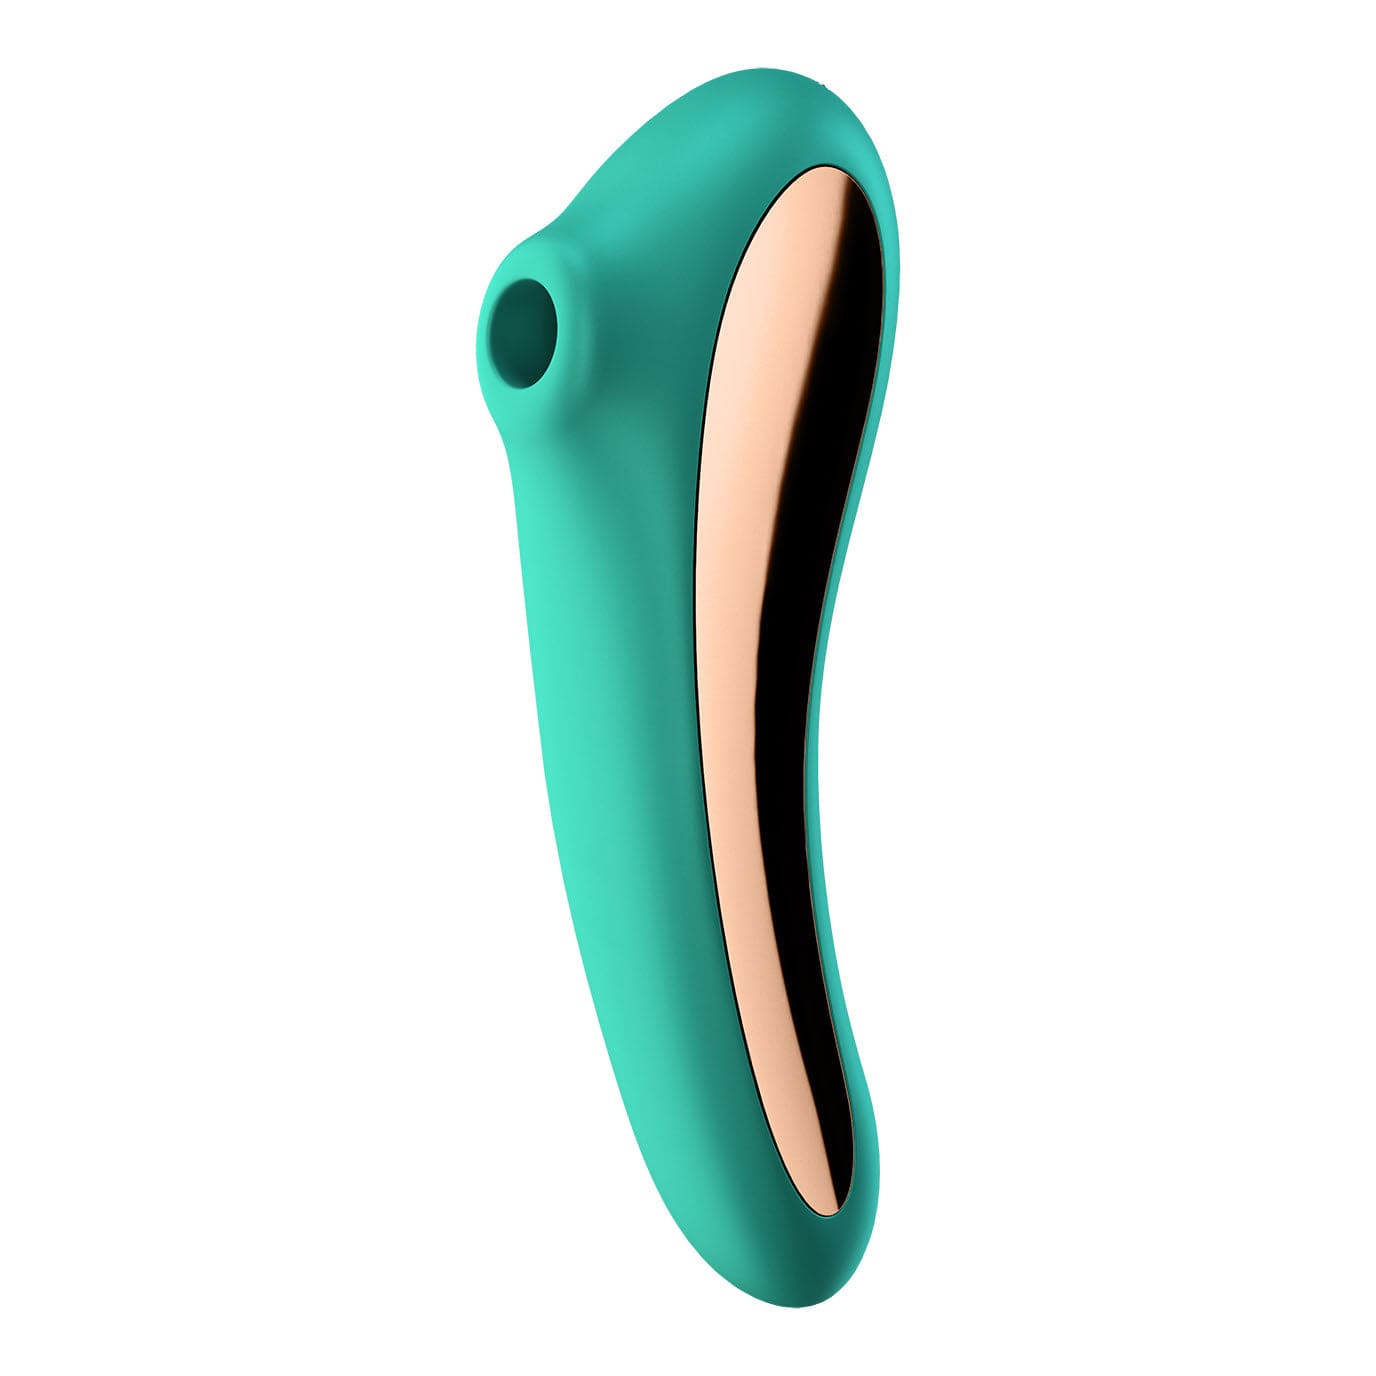 Satisfyer - Dual Kiss Insertable Air Pulse Vibrator w App-Controlled Clitoral Air Stimulator (Green) Clit Massager (Vibration) Rechargeable 4061504003016 CherryAffairs